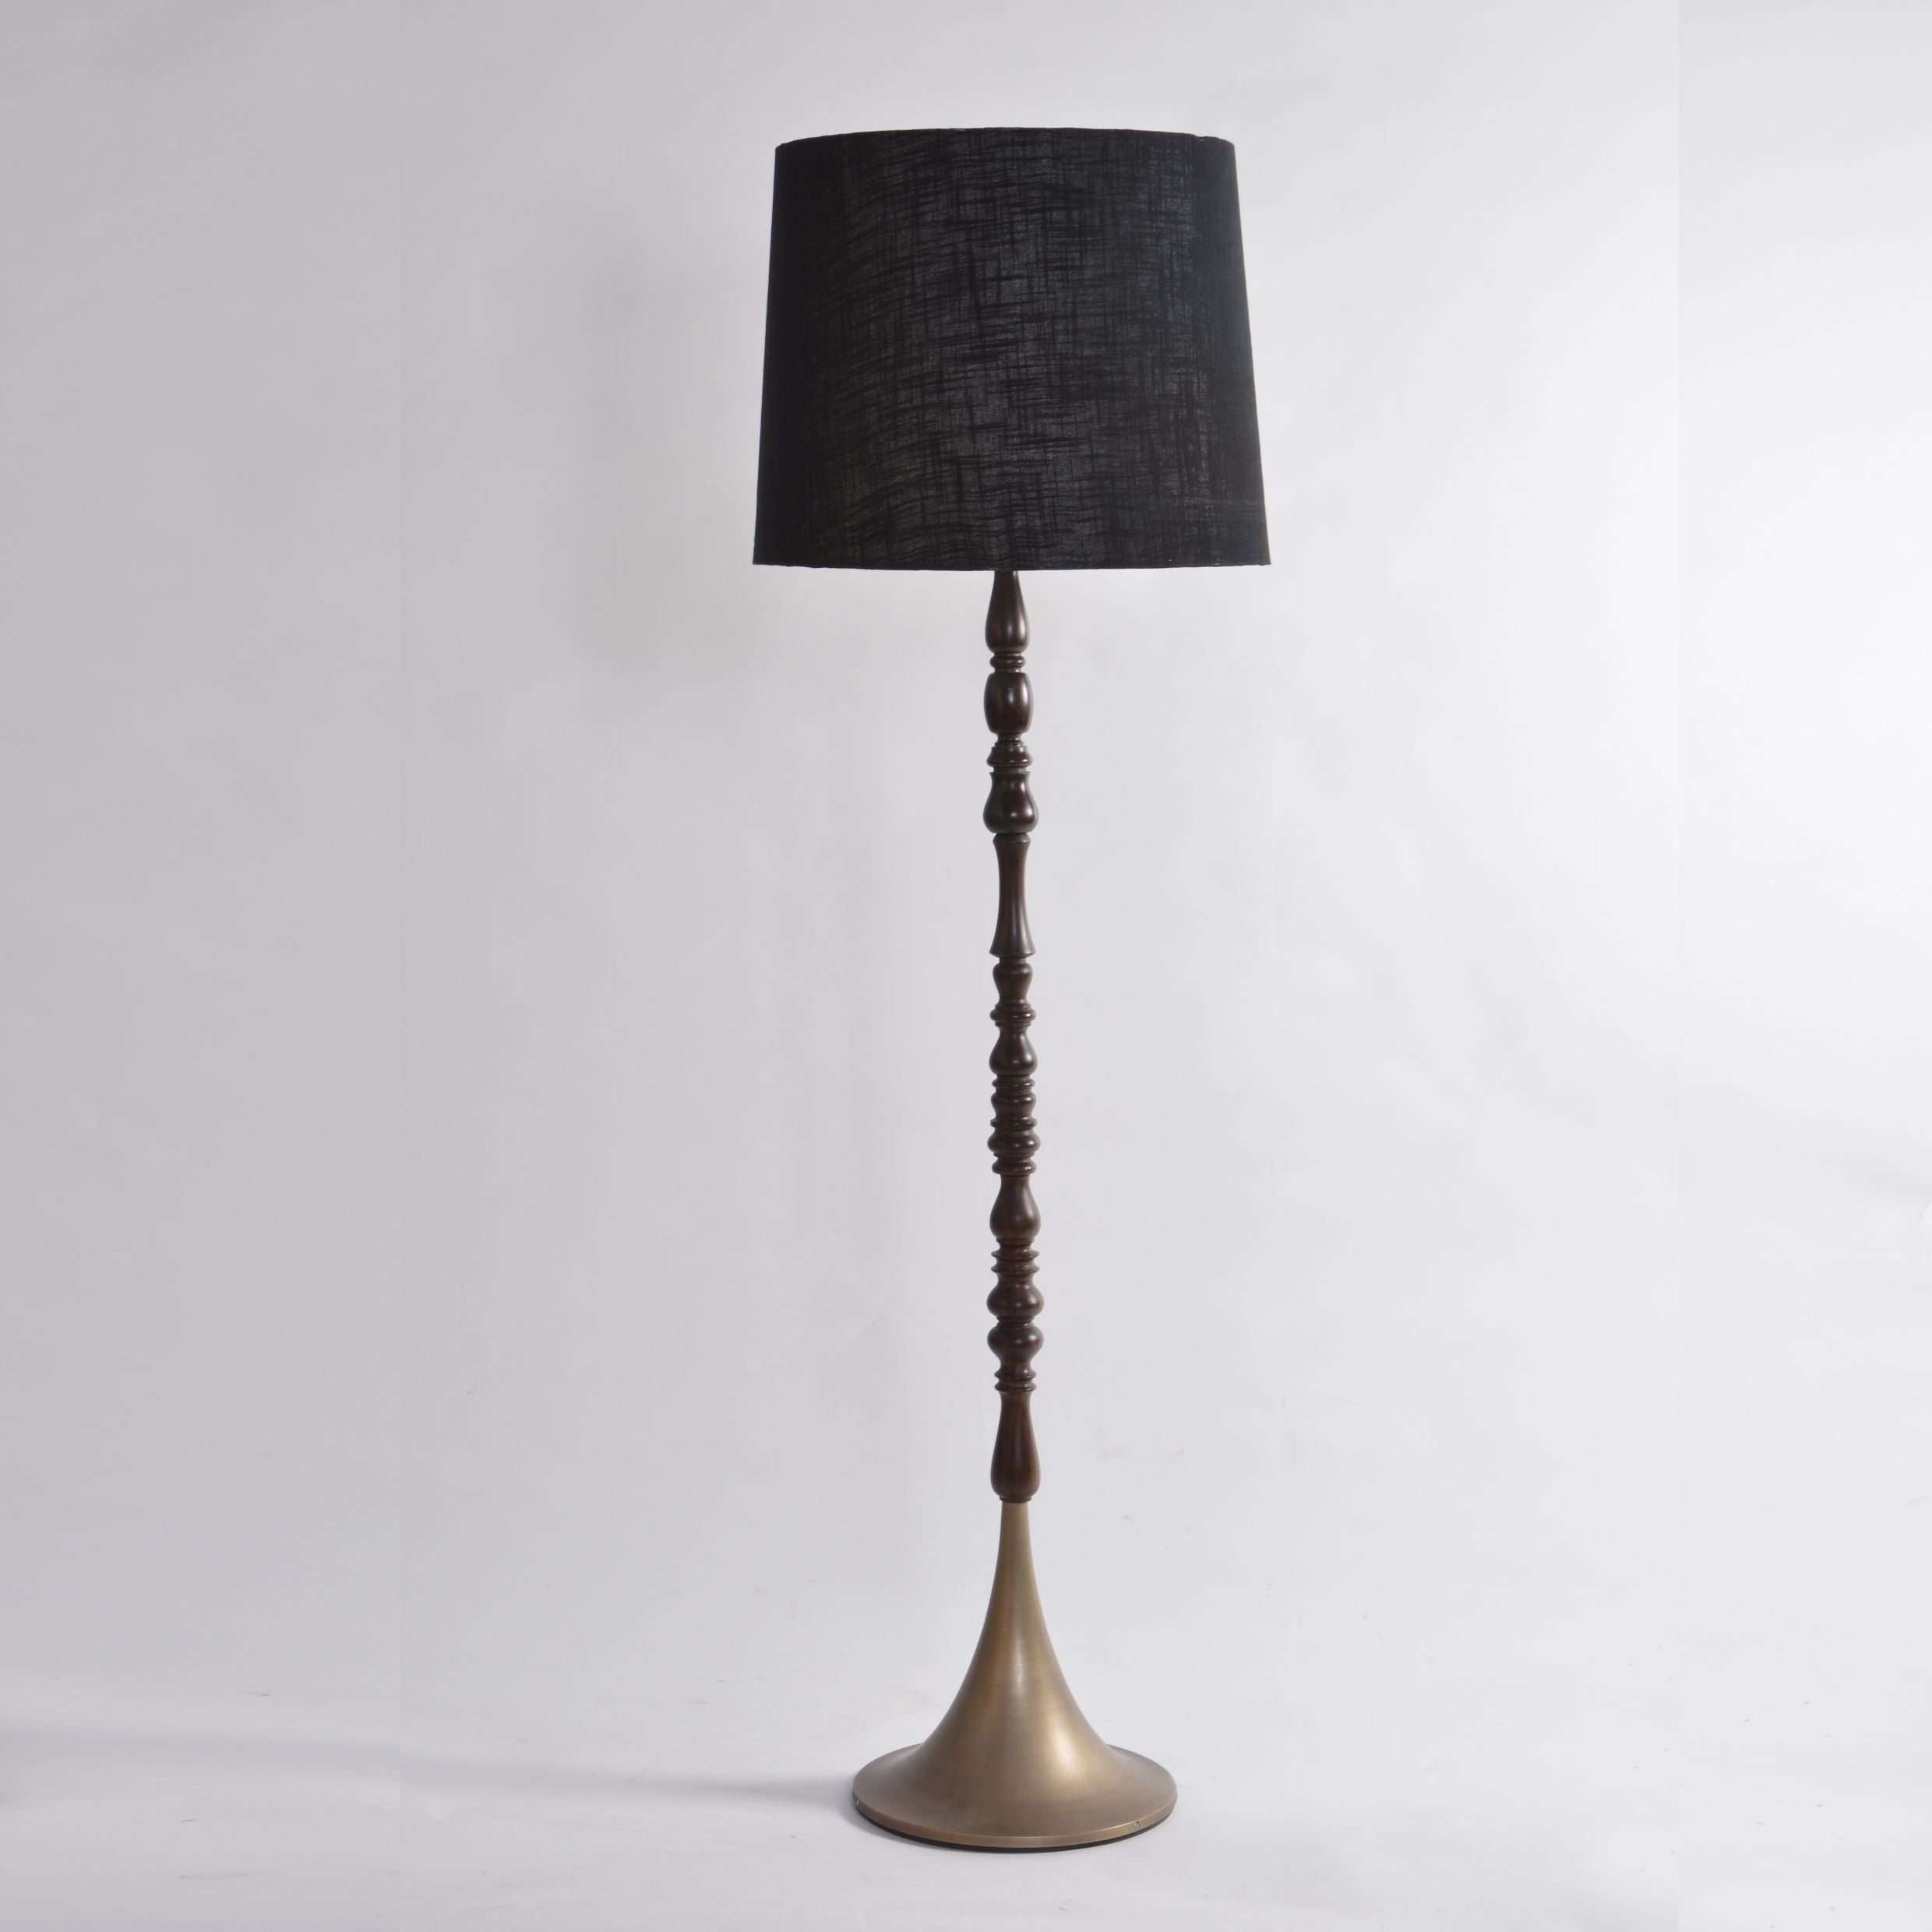 lighting lamp, lamp, handmade, crafted, made in india